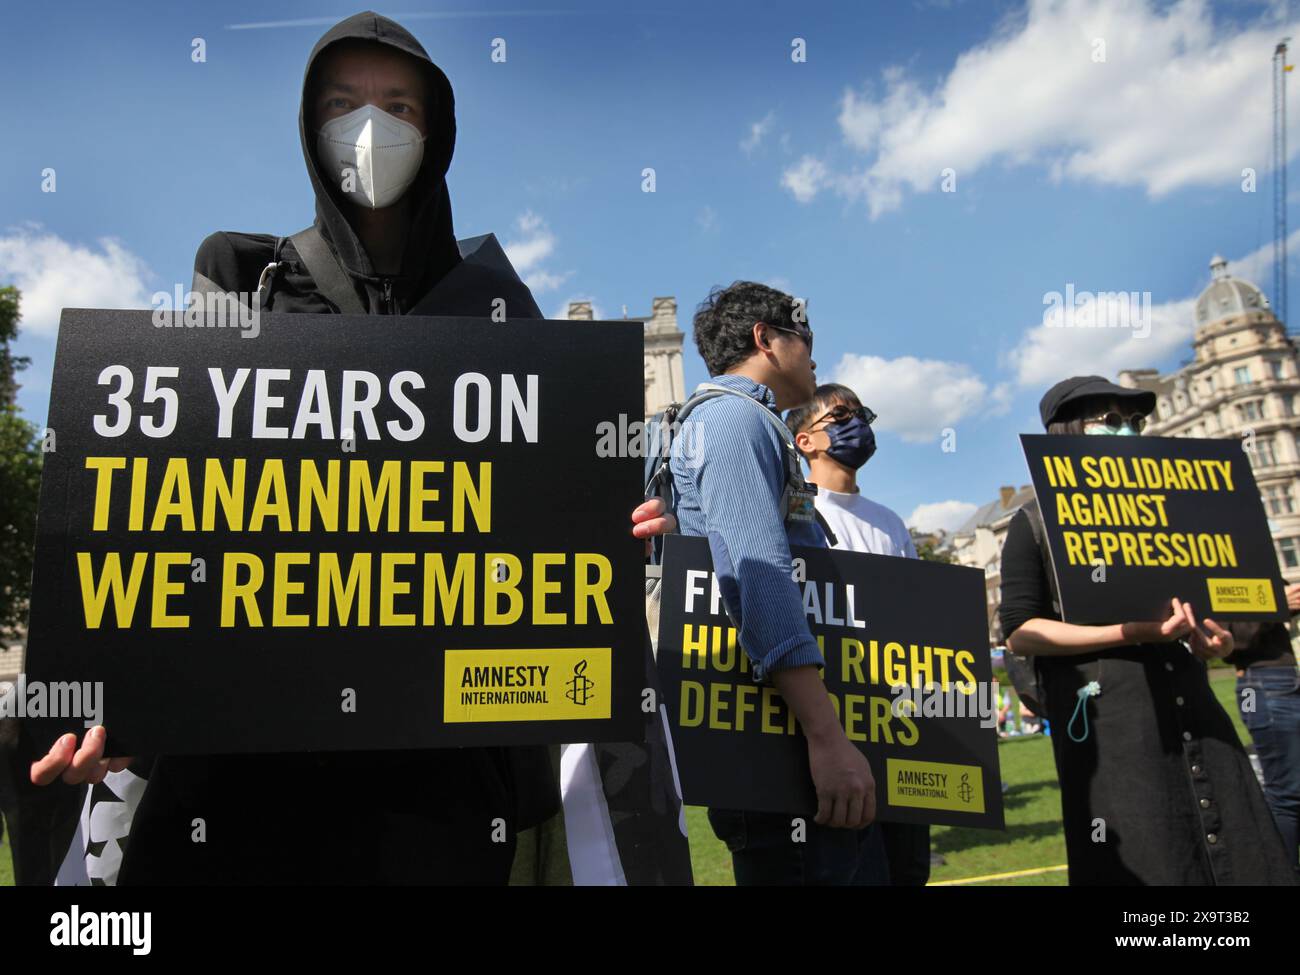 June 2, 2024, London, England, UK: Protesters hold signs supporting their position against the Chinese government during the demonstration in Parliament Square. The event commemorated the1989 student-led protests and the Chinese government's bloody crackdown on 4 June, as well as protest against China's current clampdown on freedom of speech - including its increasing repression of Tibetans and Uyghurs, its crushing of dissent in Hong Kong, and the intimidation of Chinese and Hong Kong students in the UK, Europe and North America. Thirty-five years on, the Chinese authorities still ban informa Stock Photo